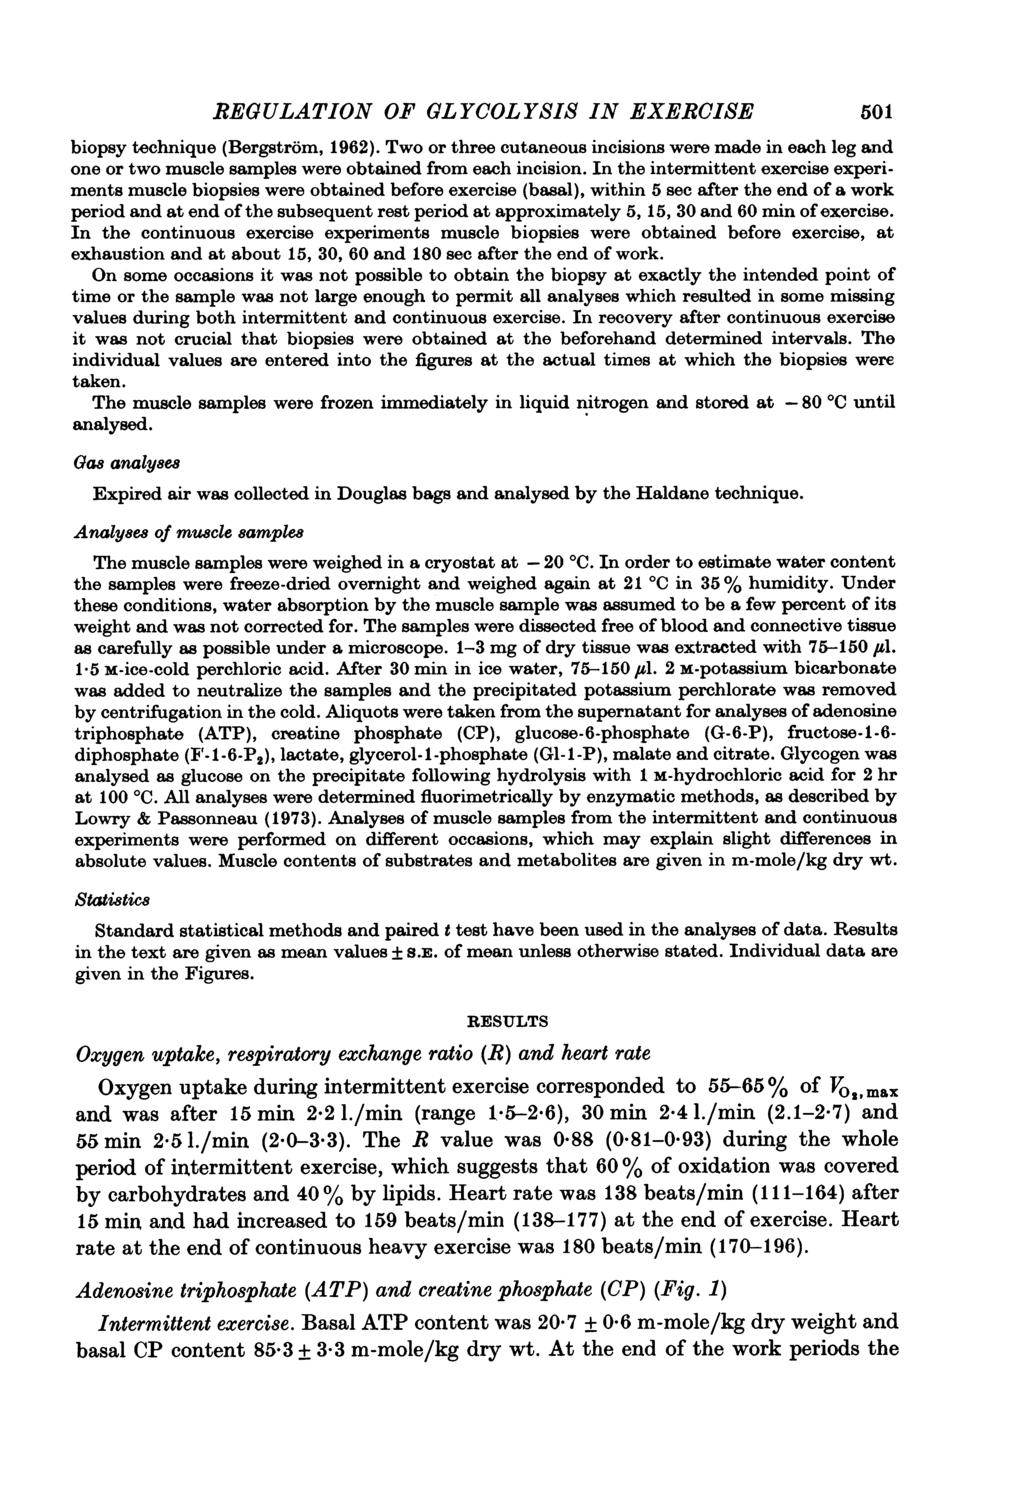 REGULATION OF GLYCOLYSIS IN EXERCISE biopsy technique (Bergstrom, 1962). Two or three cutaneous incisions were made in each leg and one or two muscle samples were obtained from each incision.